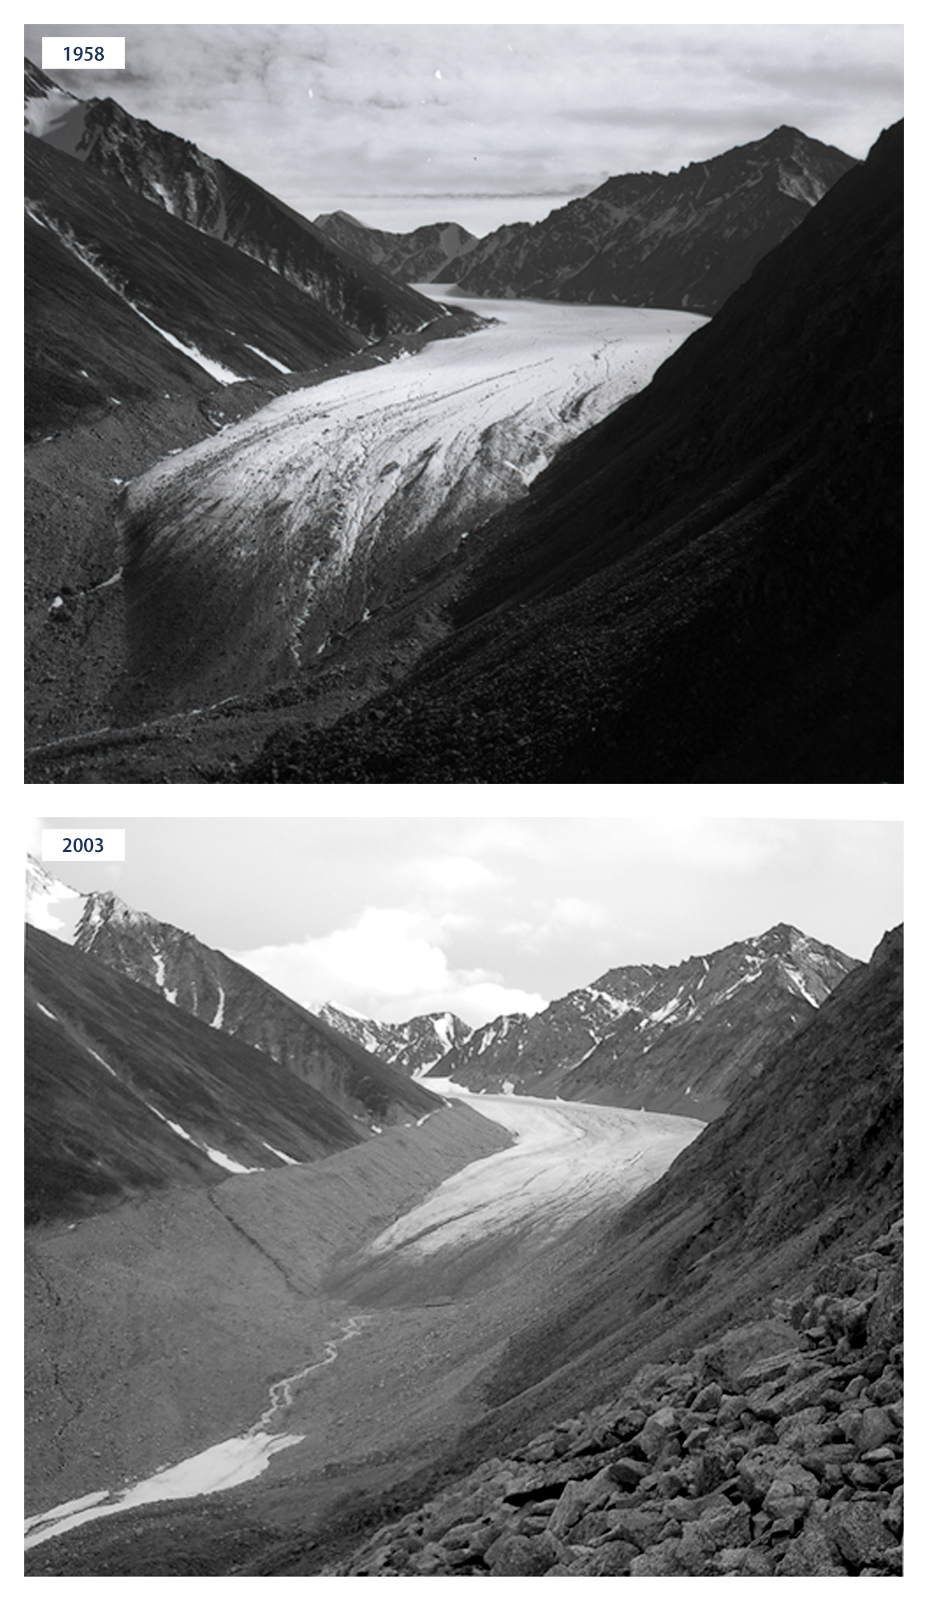 Two photographs that show McCall Glacier in Alaska from the same viewpoint in 1958 and 2003.